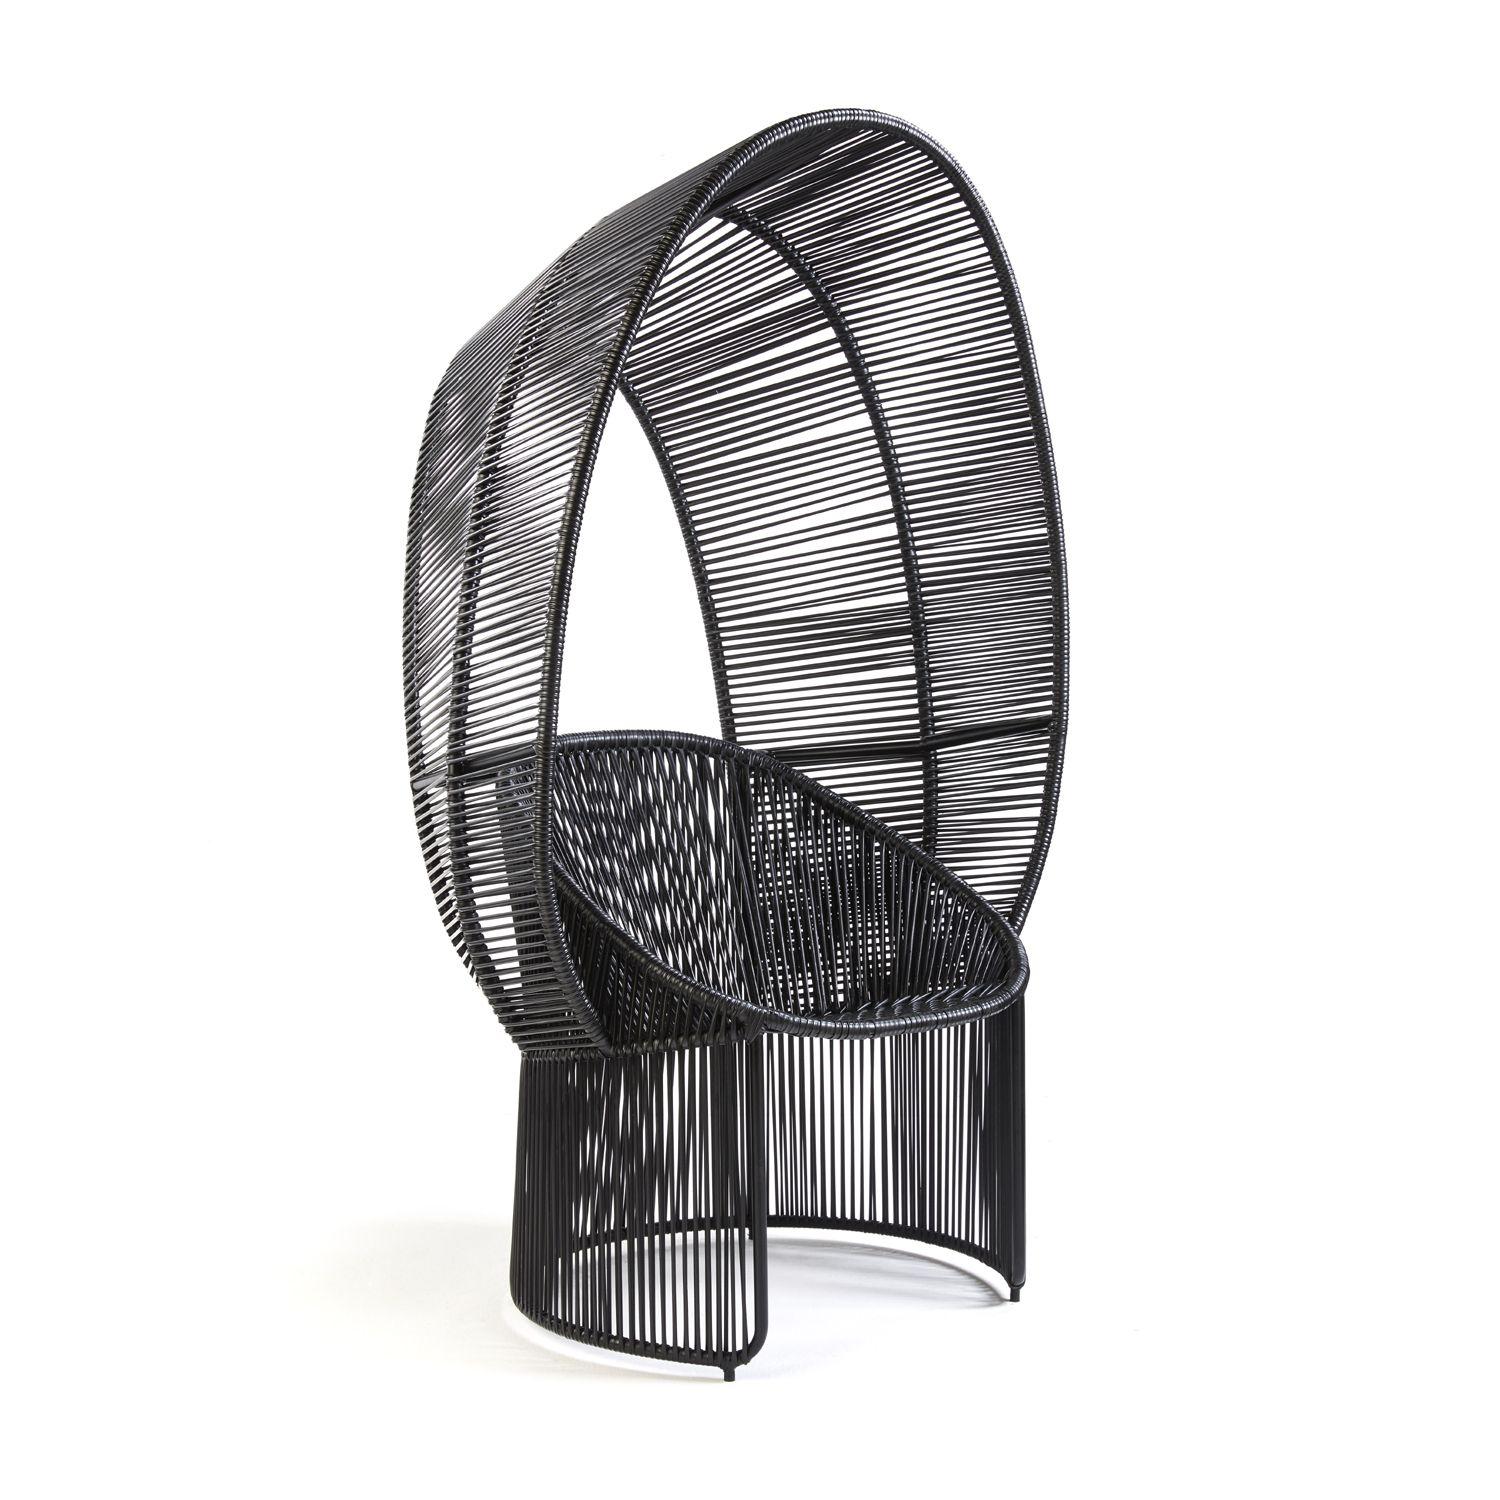 Black Cartagenas reina chair by Sebastian Herkner
Materials: PVC strings. Galvanized and powder-coated tubular steel frame
Technique: made from recycled plastic. Weaved by local craftspeople in Colombia. 
Dimensions: W 82.3 x D 90 x H 155 cm